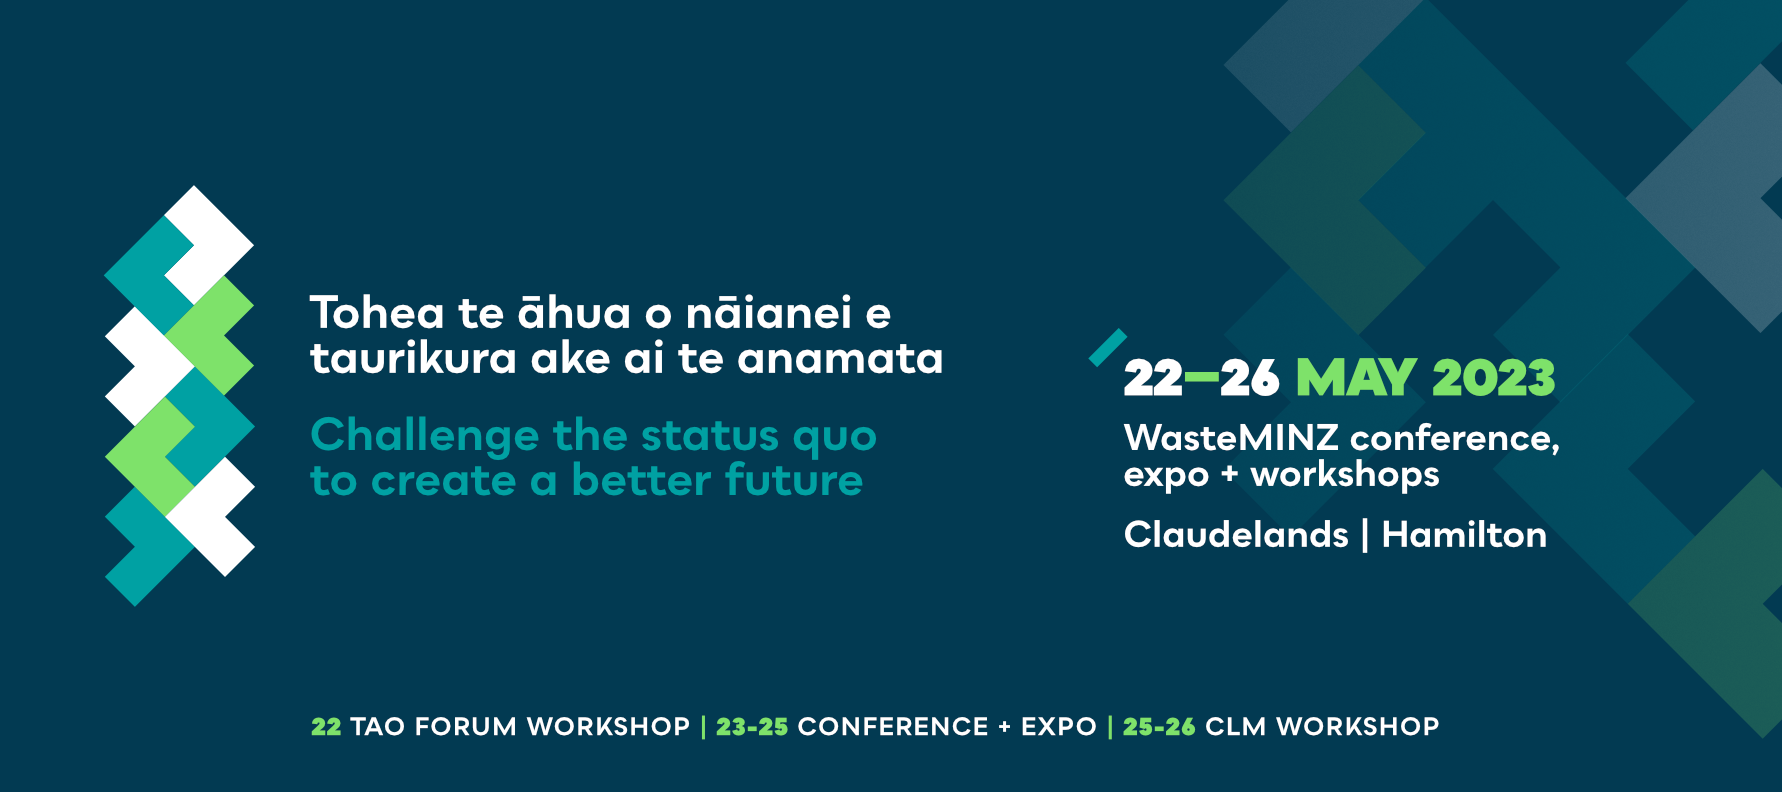 WasteMINZ Conference, Expo + Workshops 2023